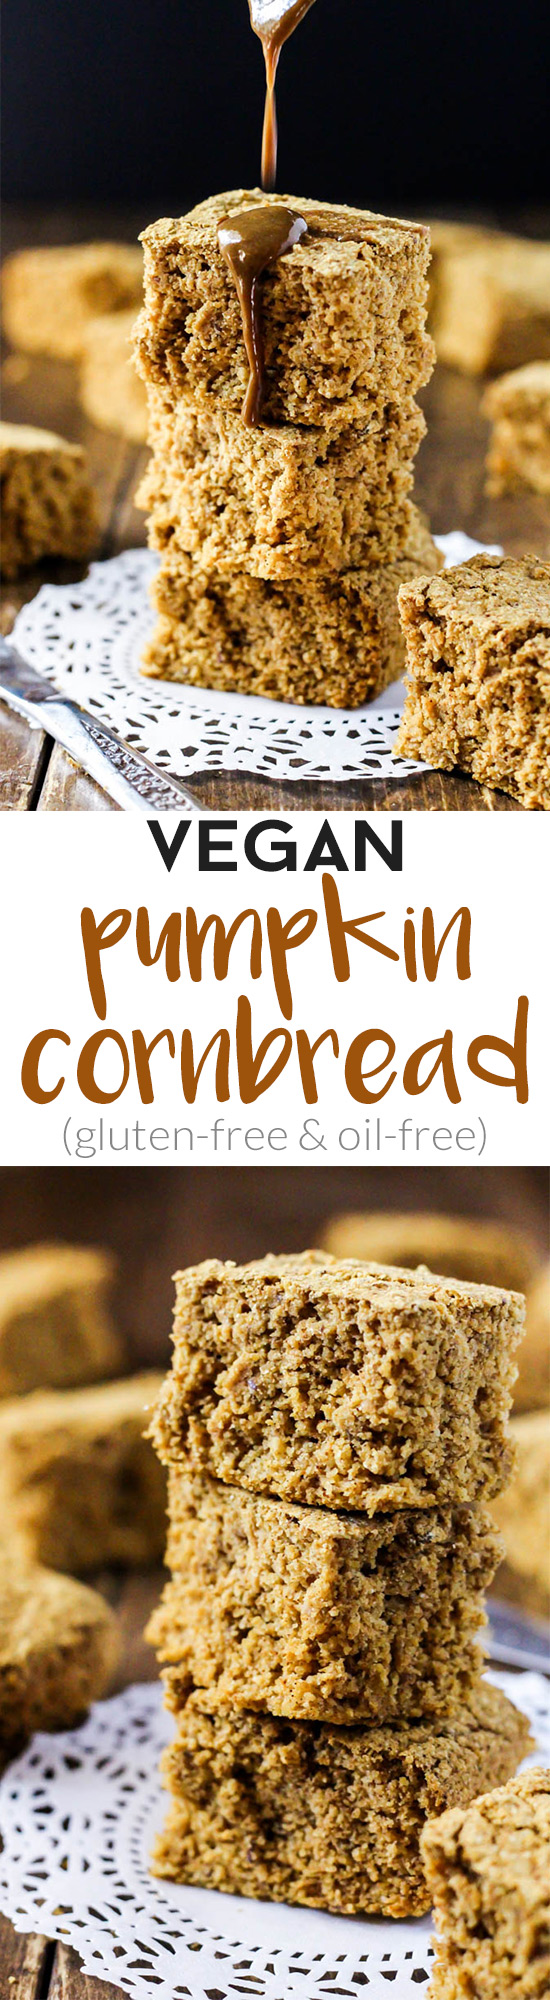 This delicious, fluffy Vegan Pumpkin Cornbread is your new favorite side dish for a holiday dinner or weeknight meal! Gluten-free & oil-free.